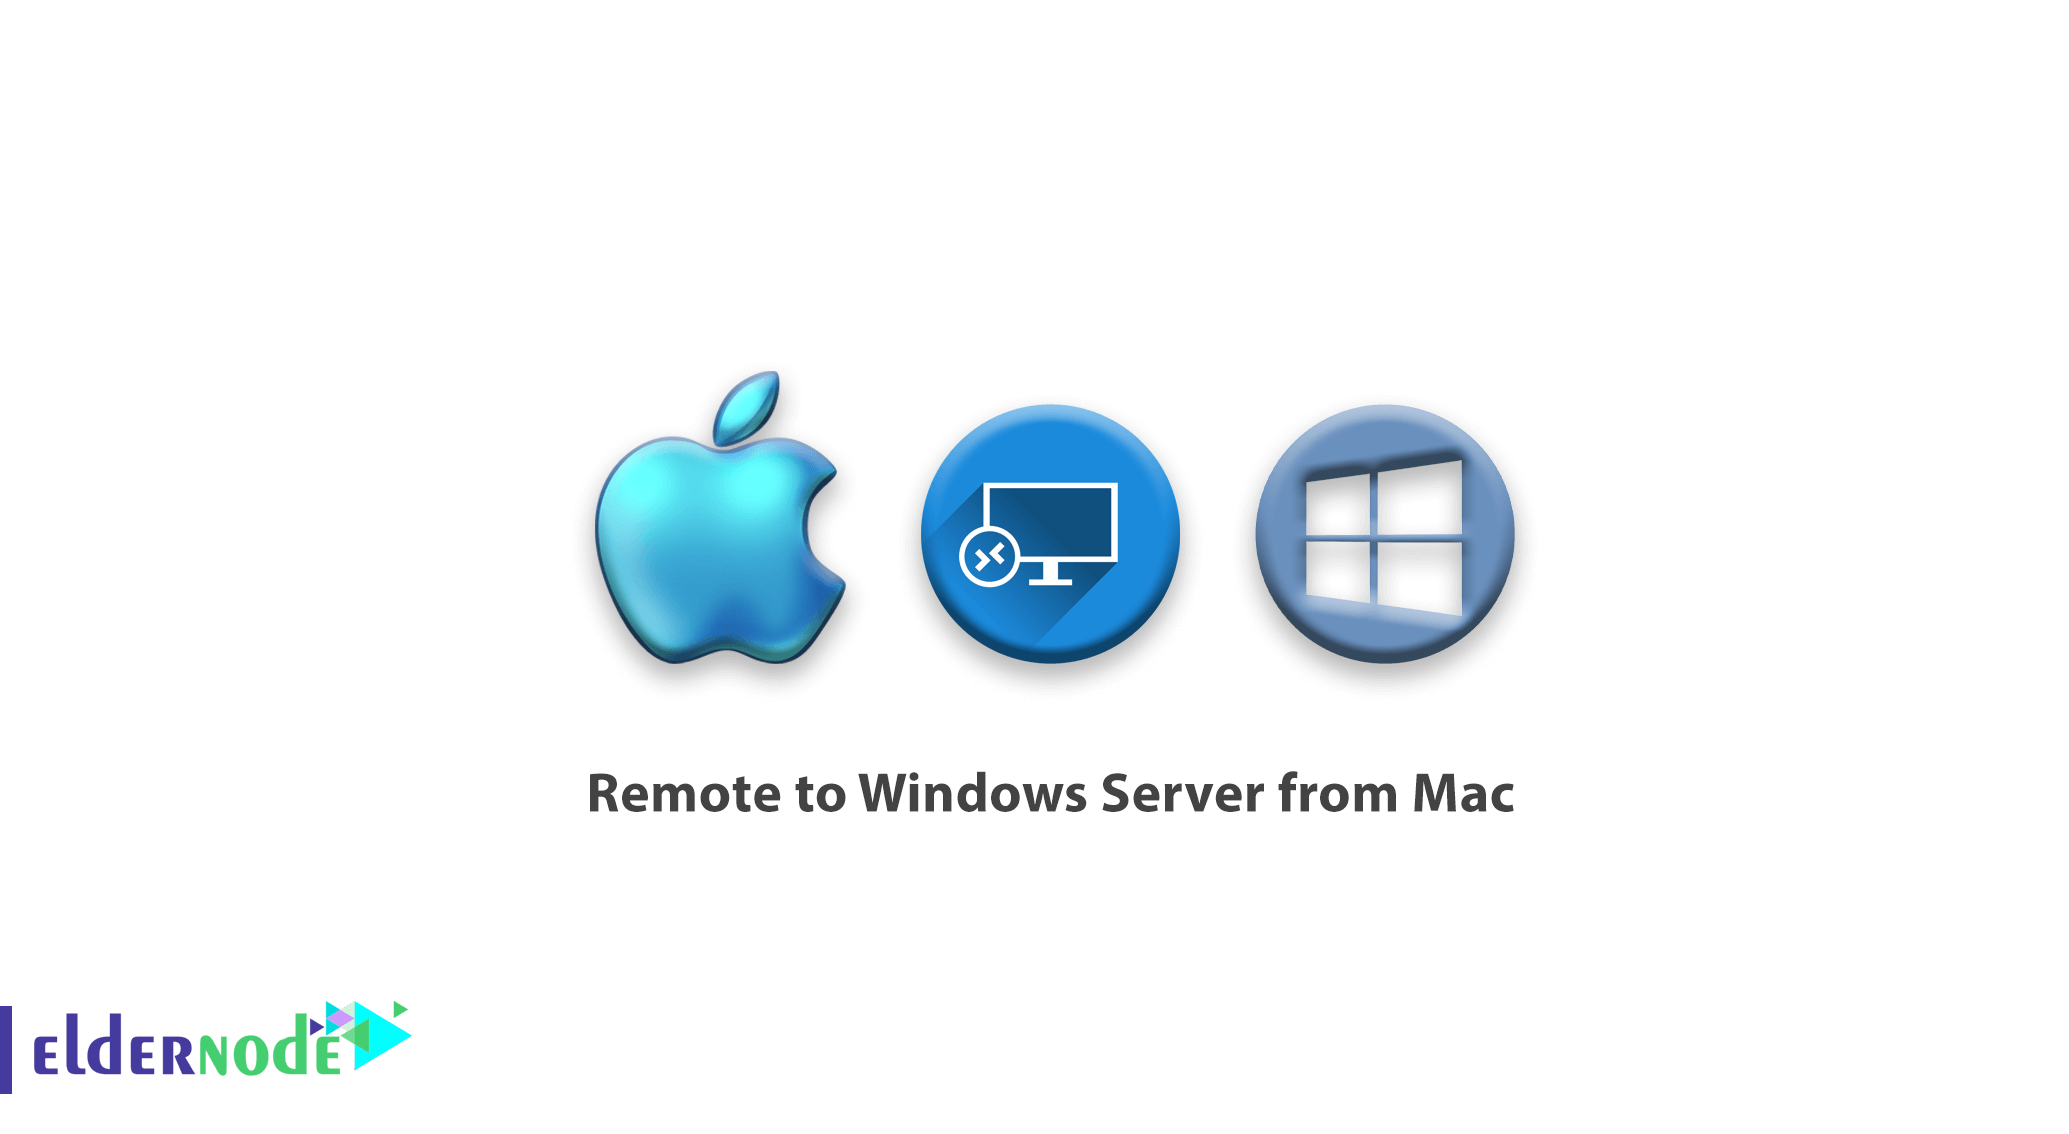 How to remote to windows server from mac